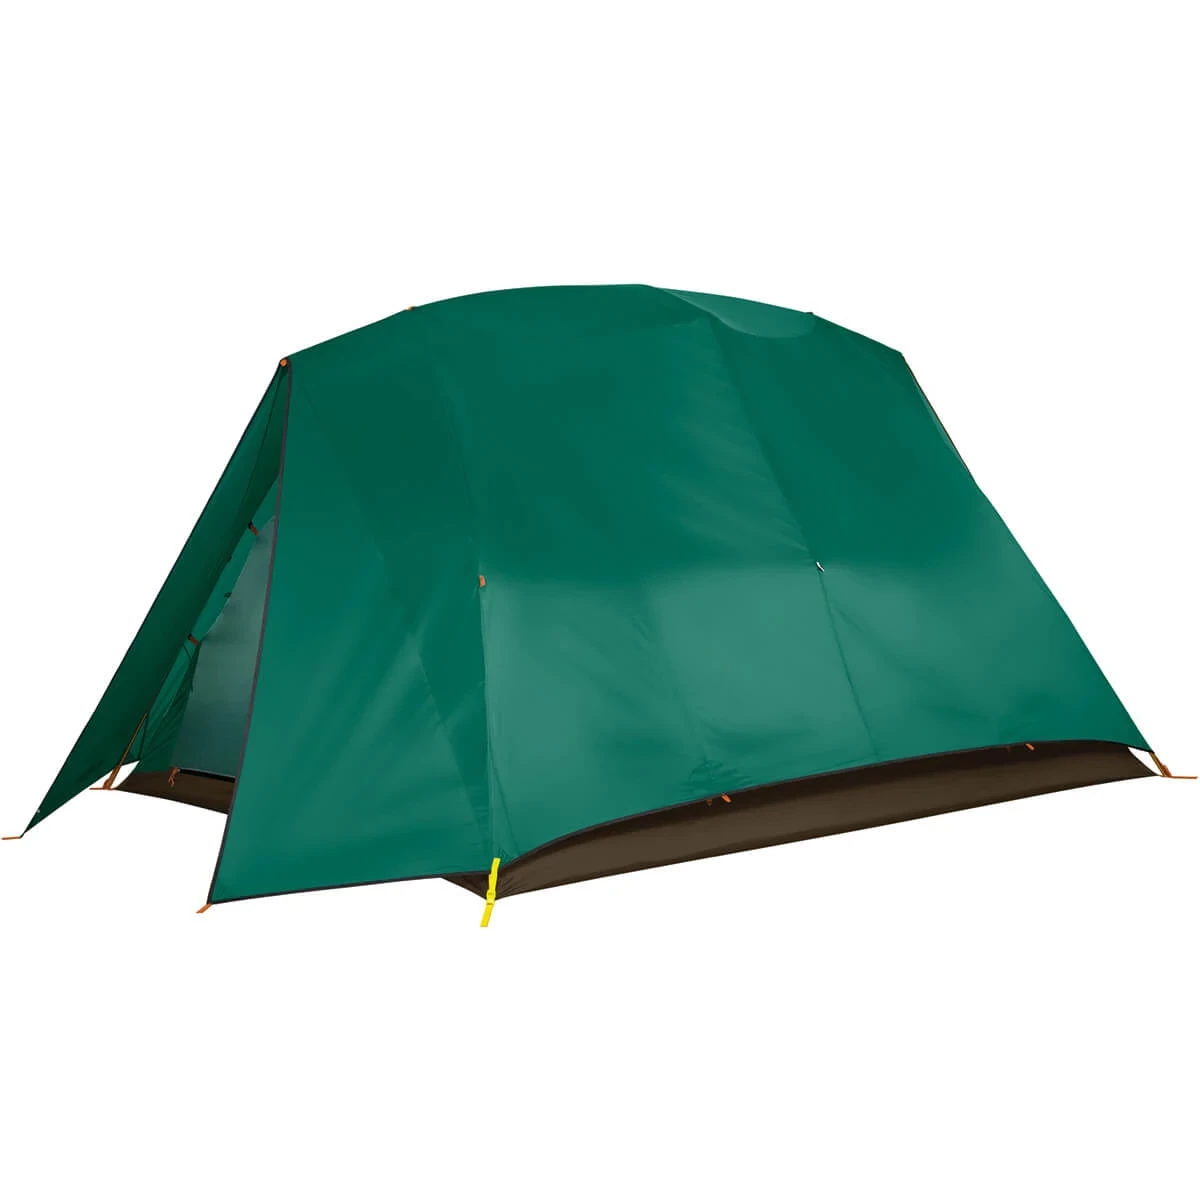 Timberline SQ Outfitter 6 tent with rainfly